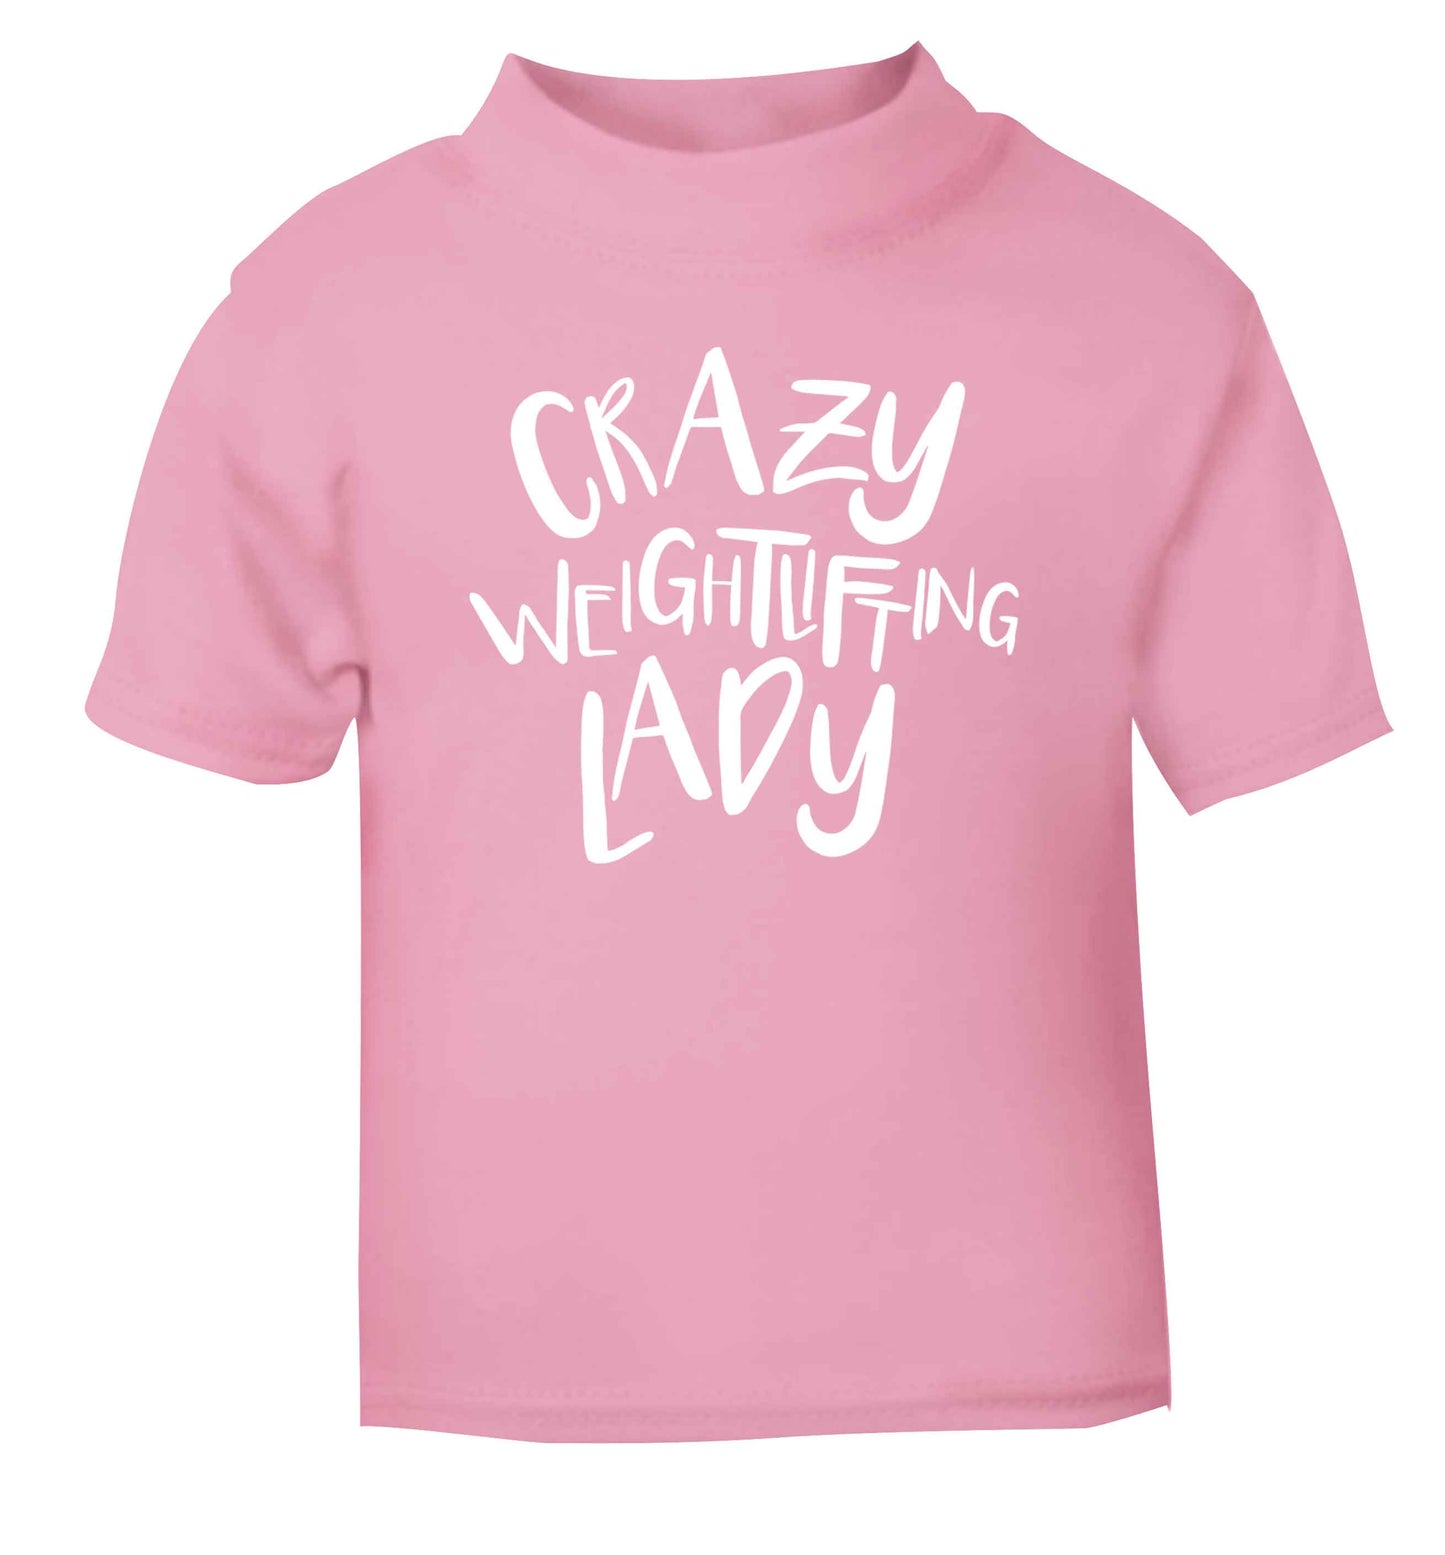 Crazy weightlifting lady light pink Baby Toddler Tshirt 2 Years